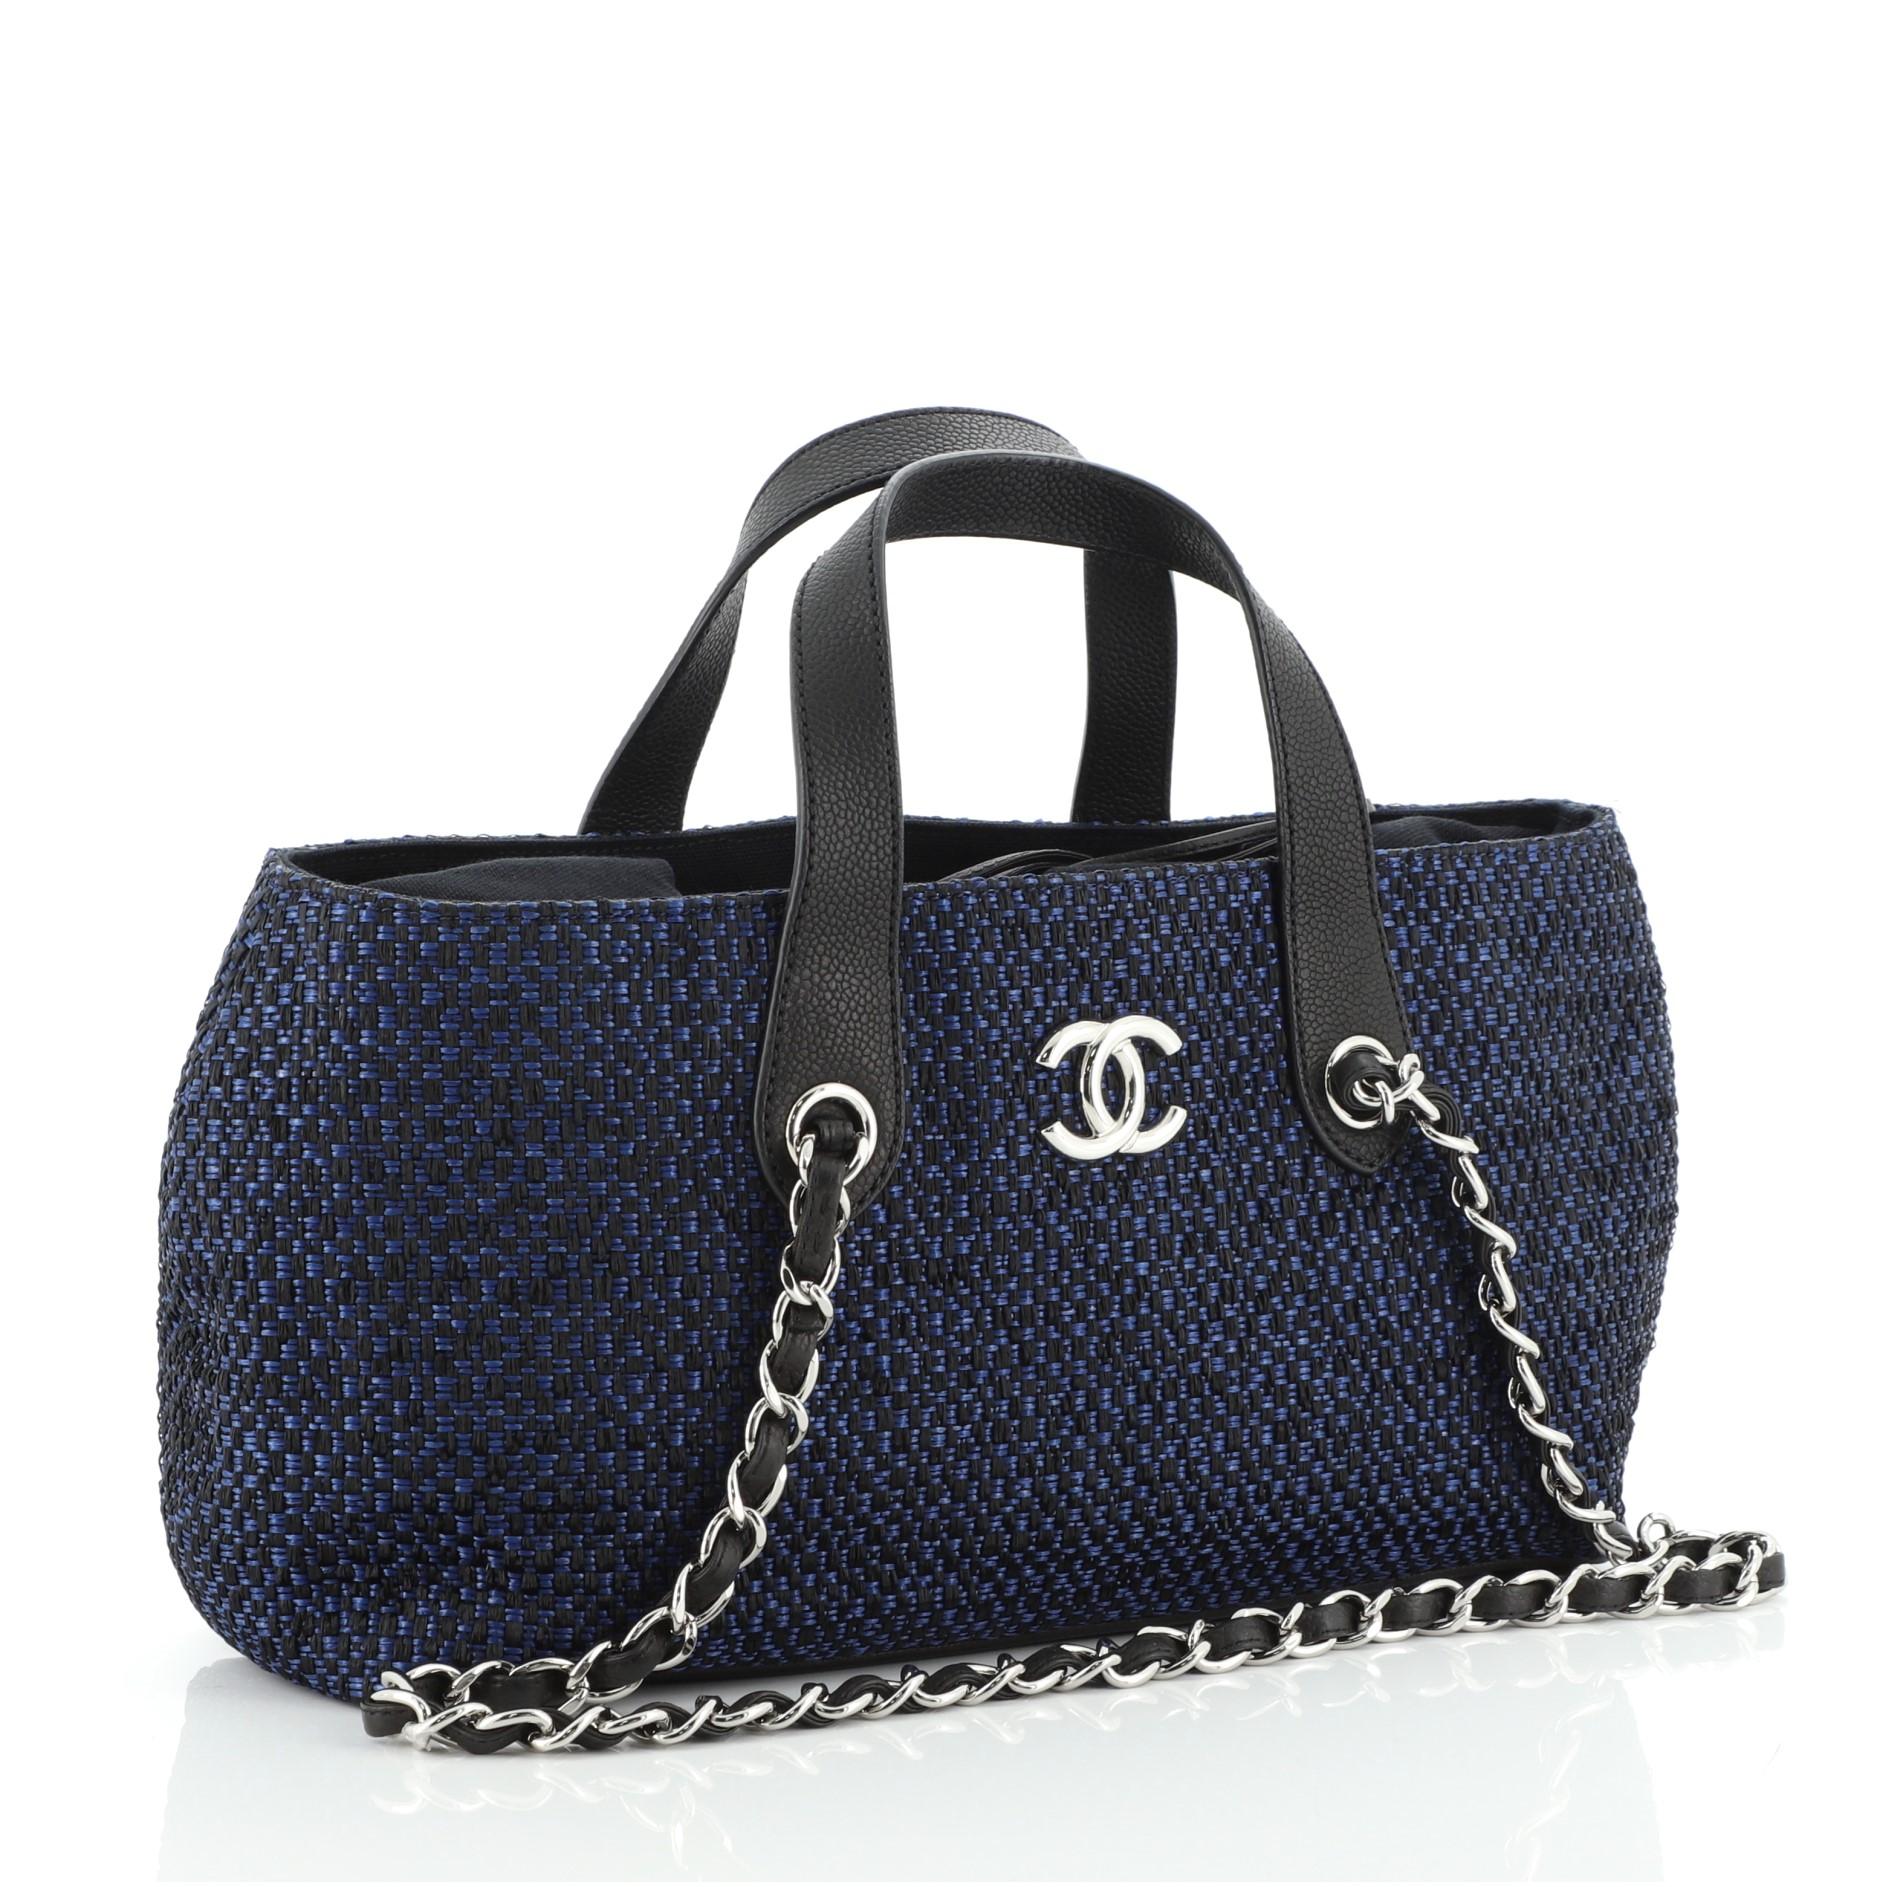 Black Chanel Shopping Tote Woven Straw Small